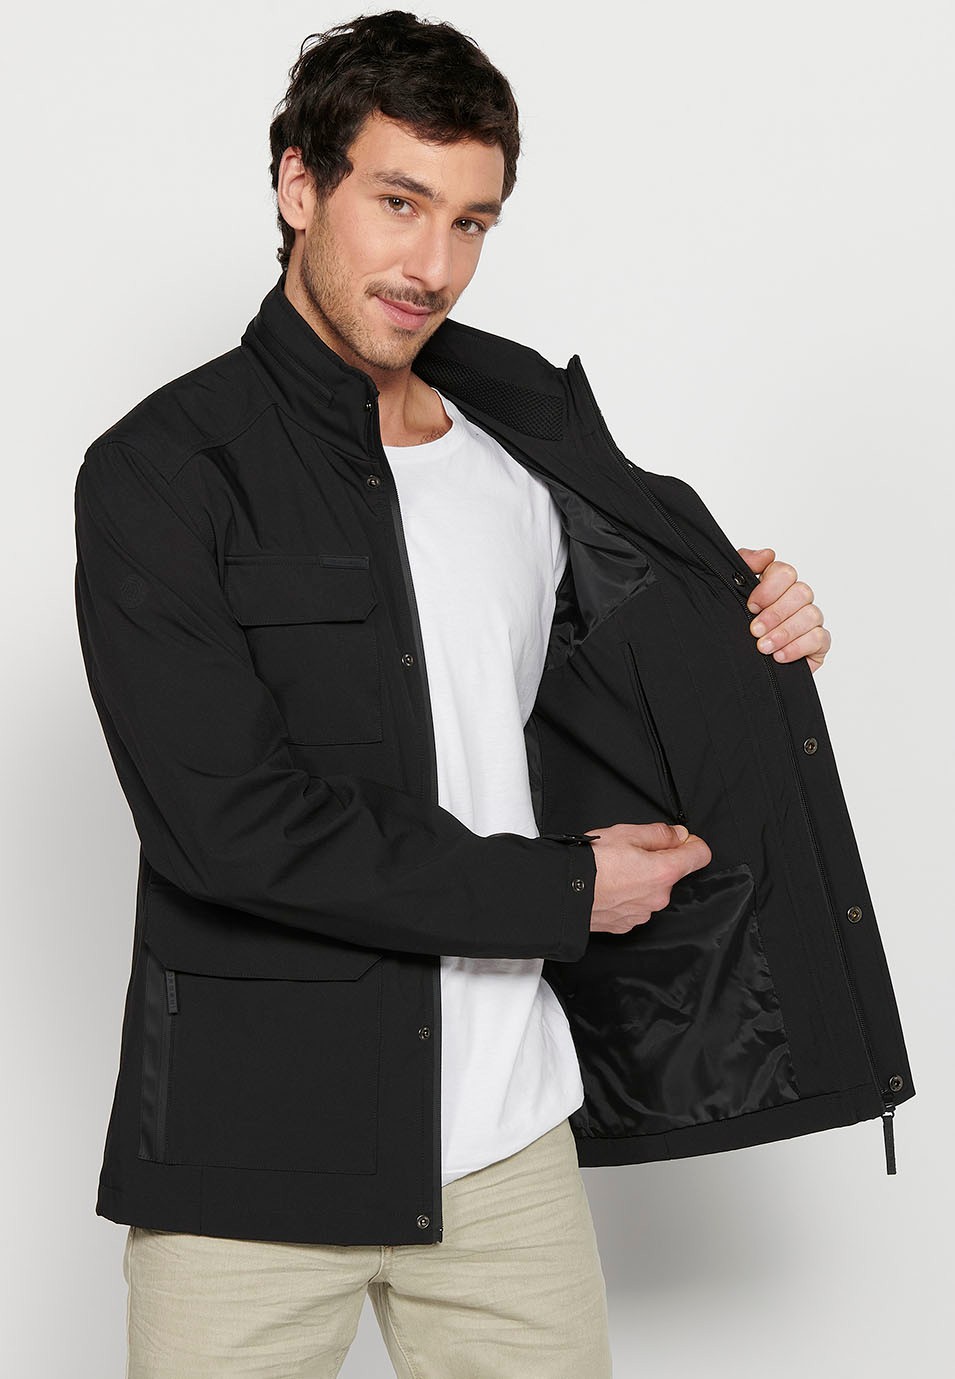 Long Black High Neck Windbreaker Jacket with Front Zipper Closure and Four Flap Pockets for Men 6